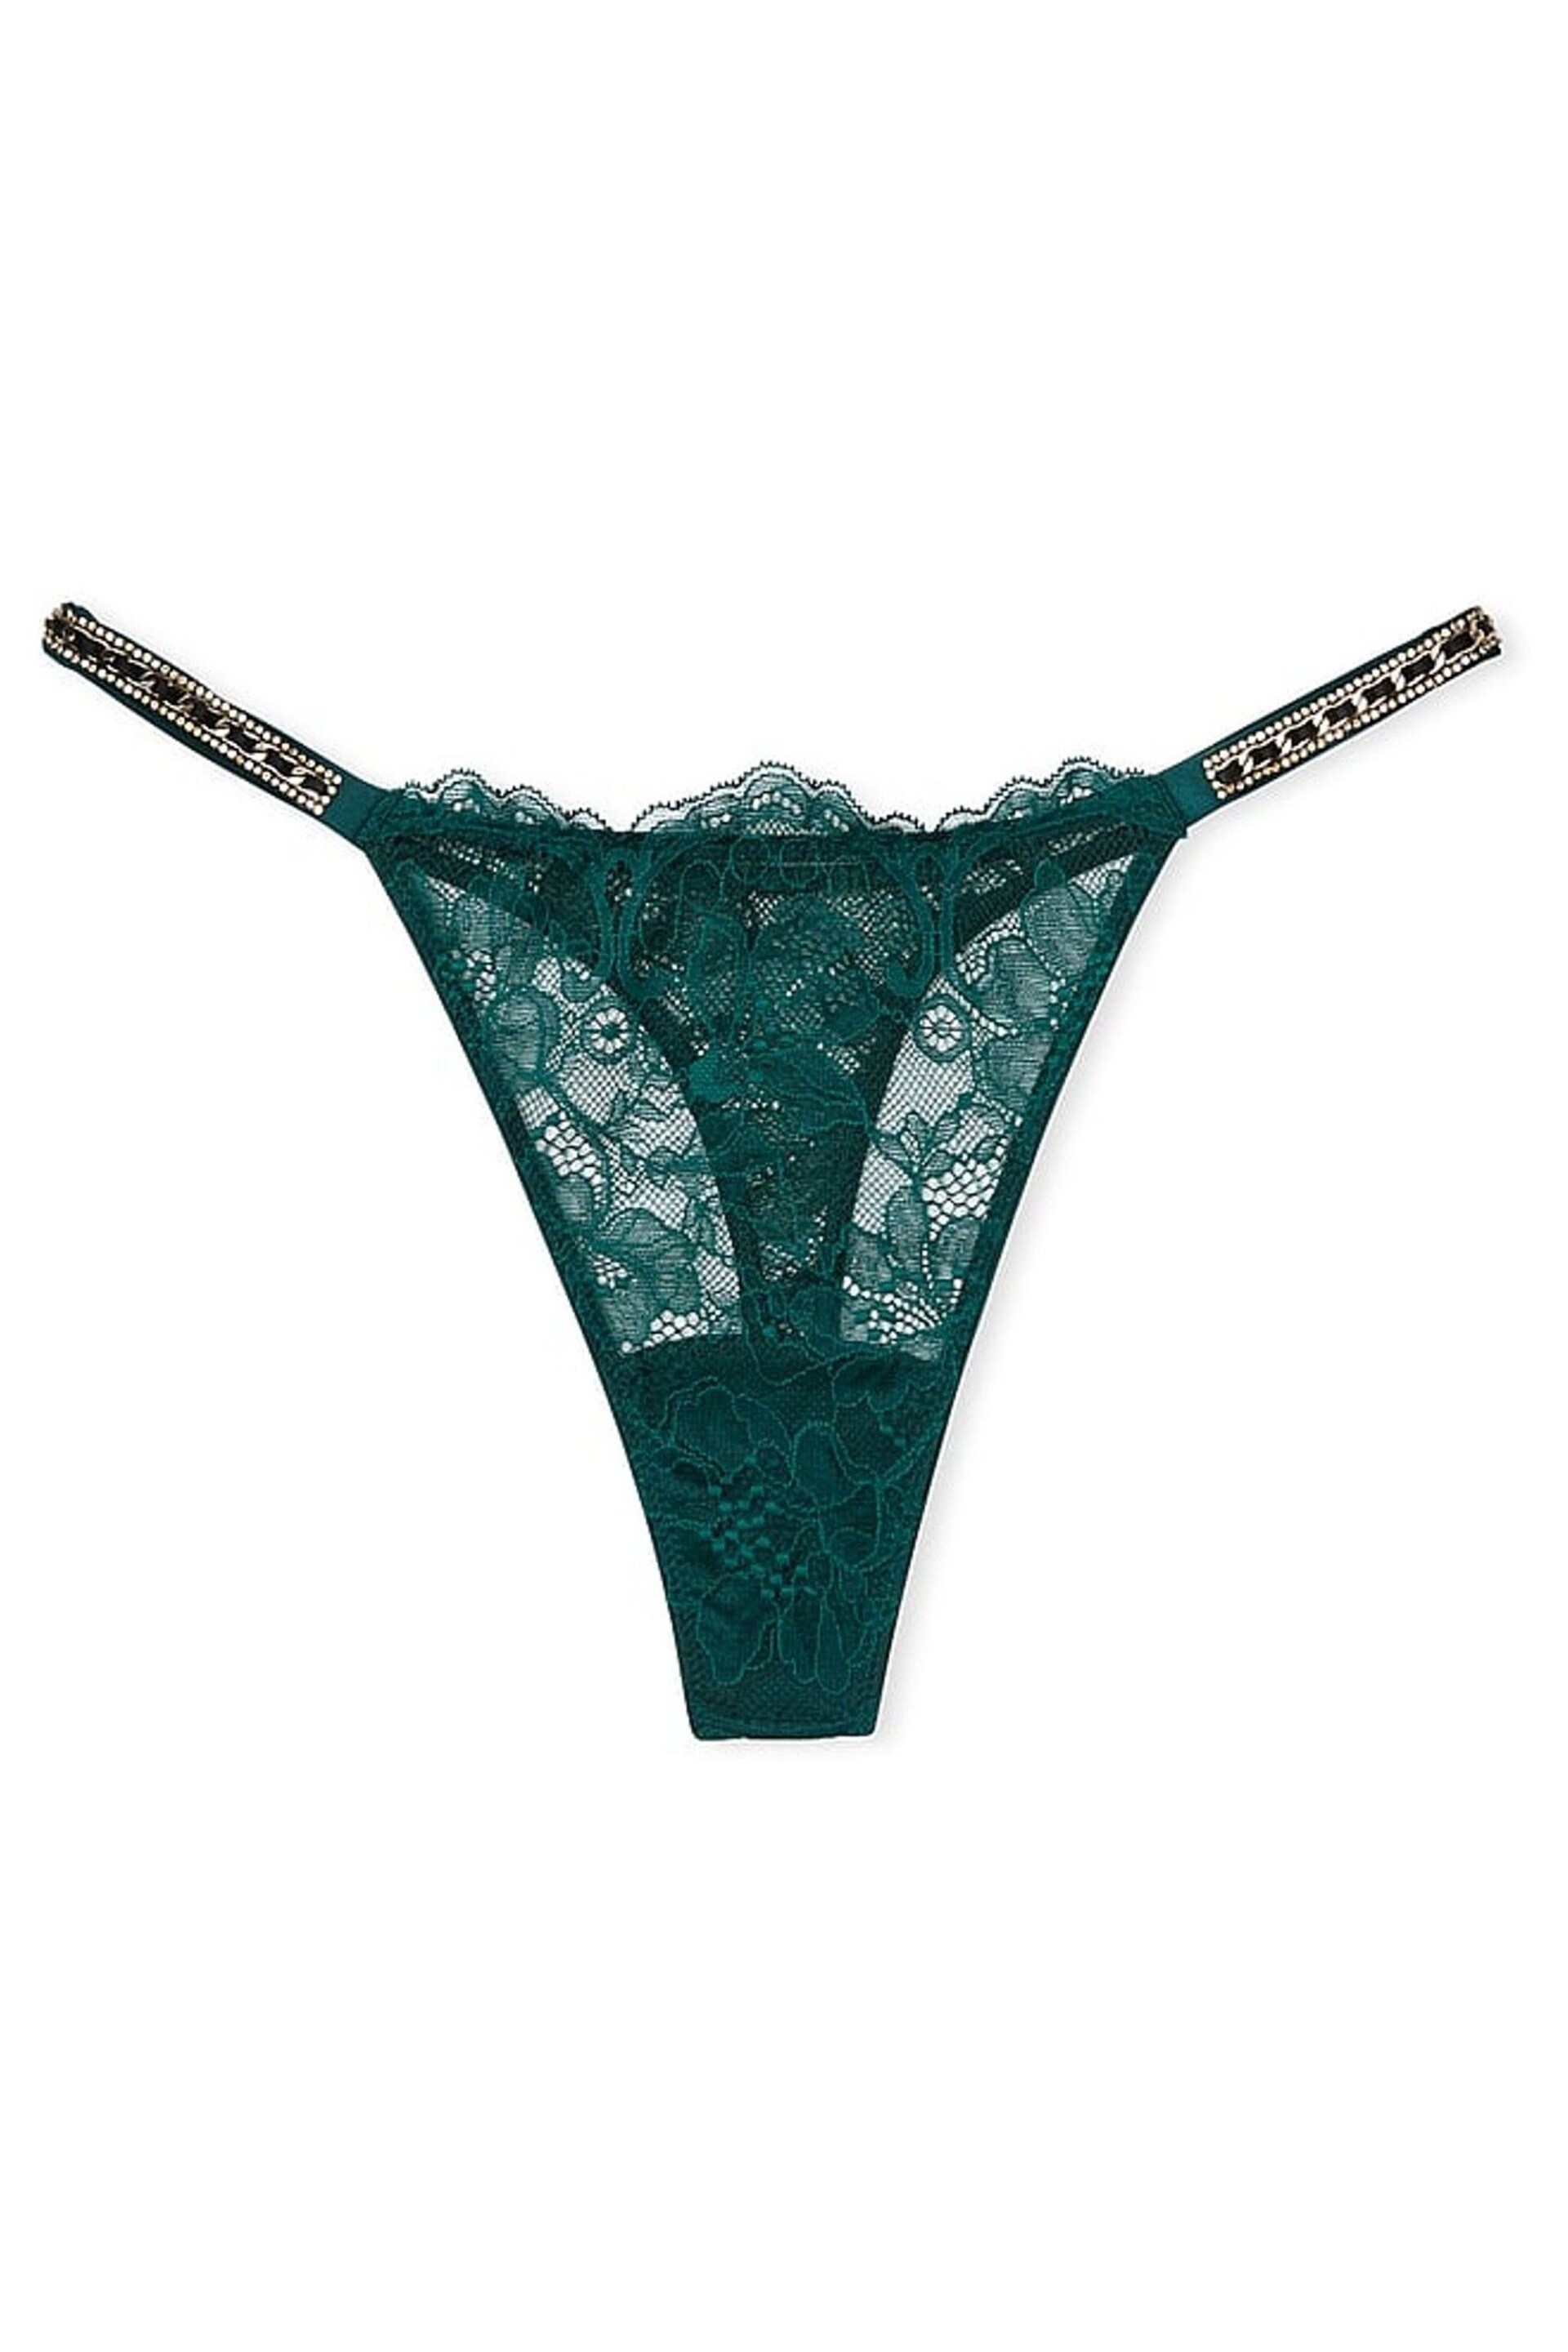 Victoria's Secret Black Ivy Green Skinny Chain Thong Shine Strap Knickers - Image 3 of 3